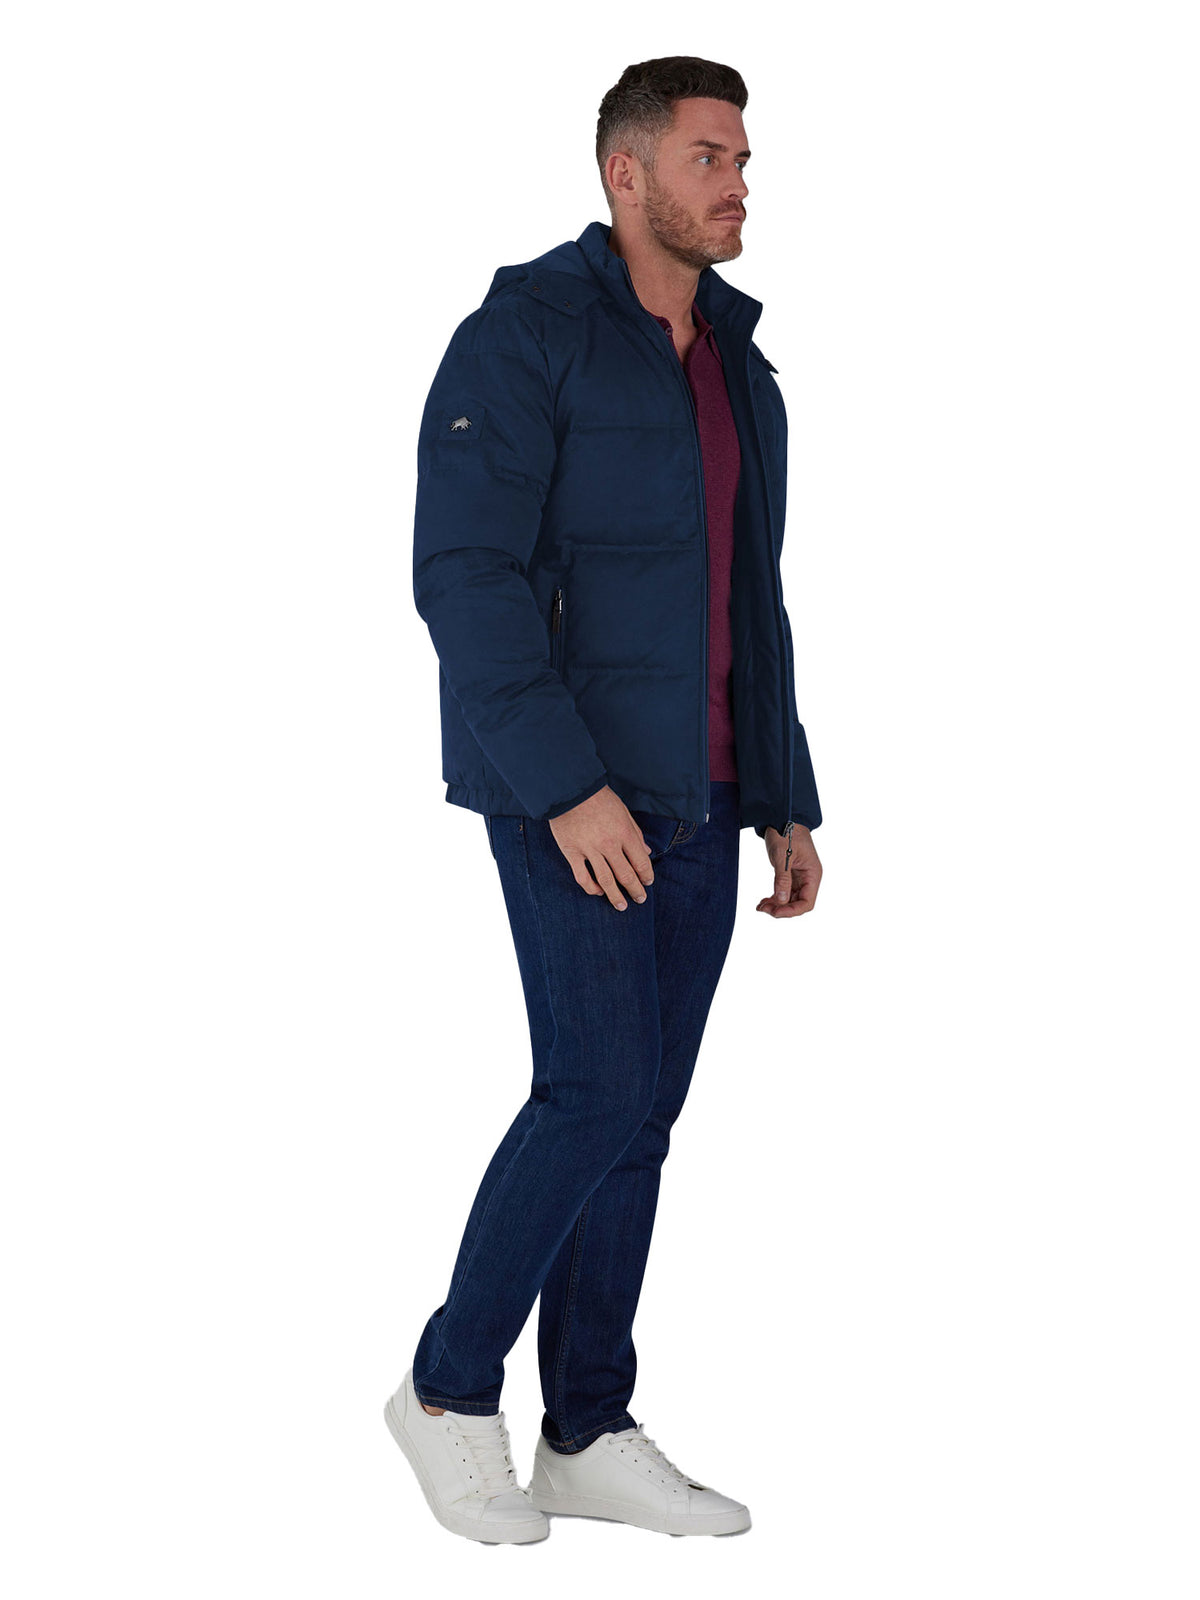 Hooded Puffer Jacket - Navy